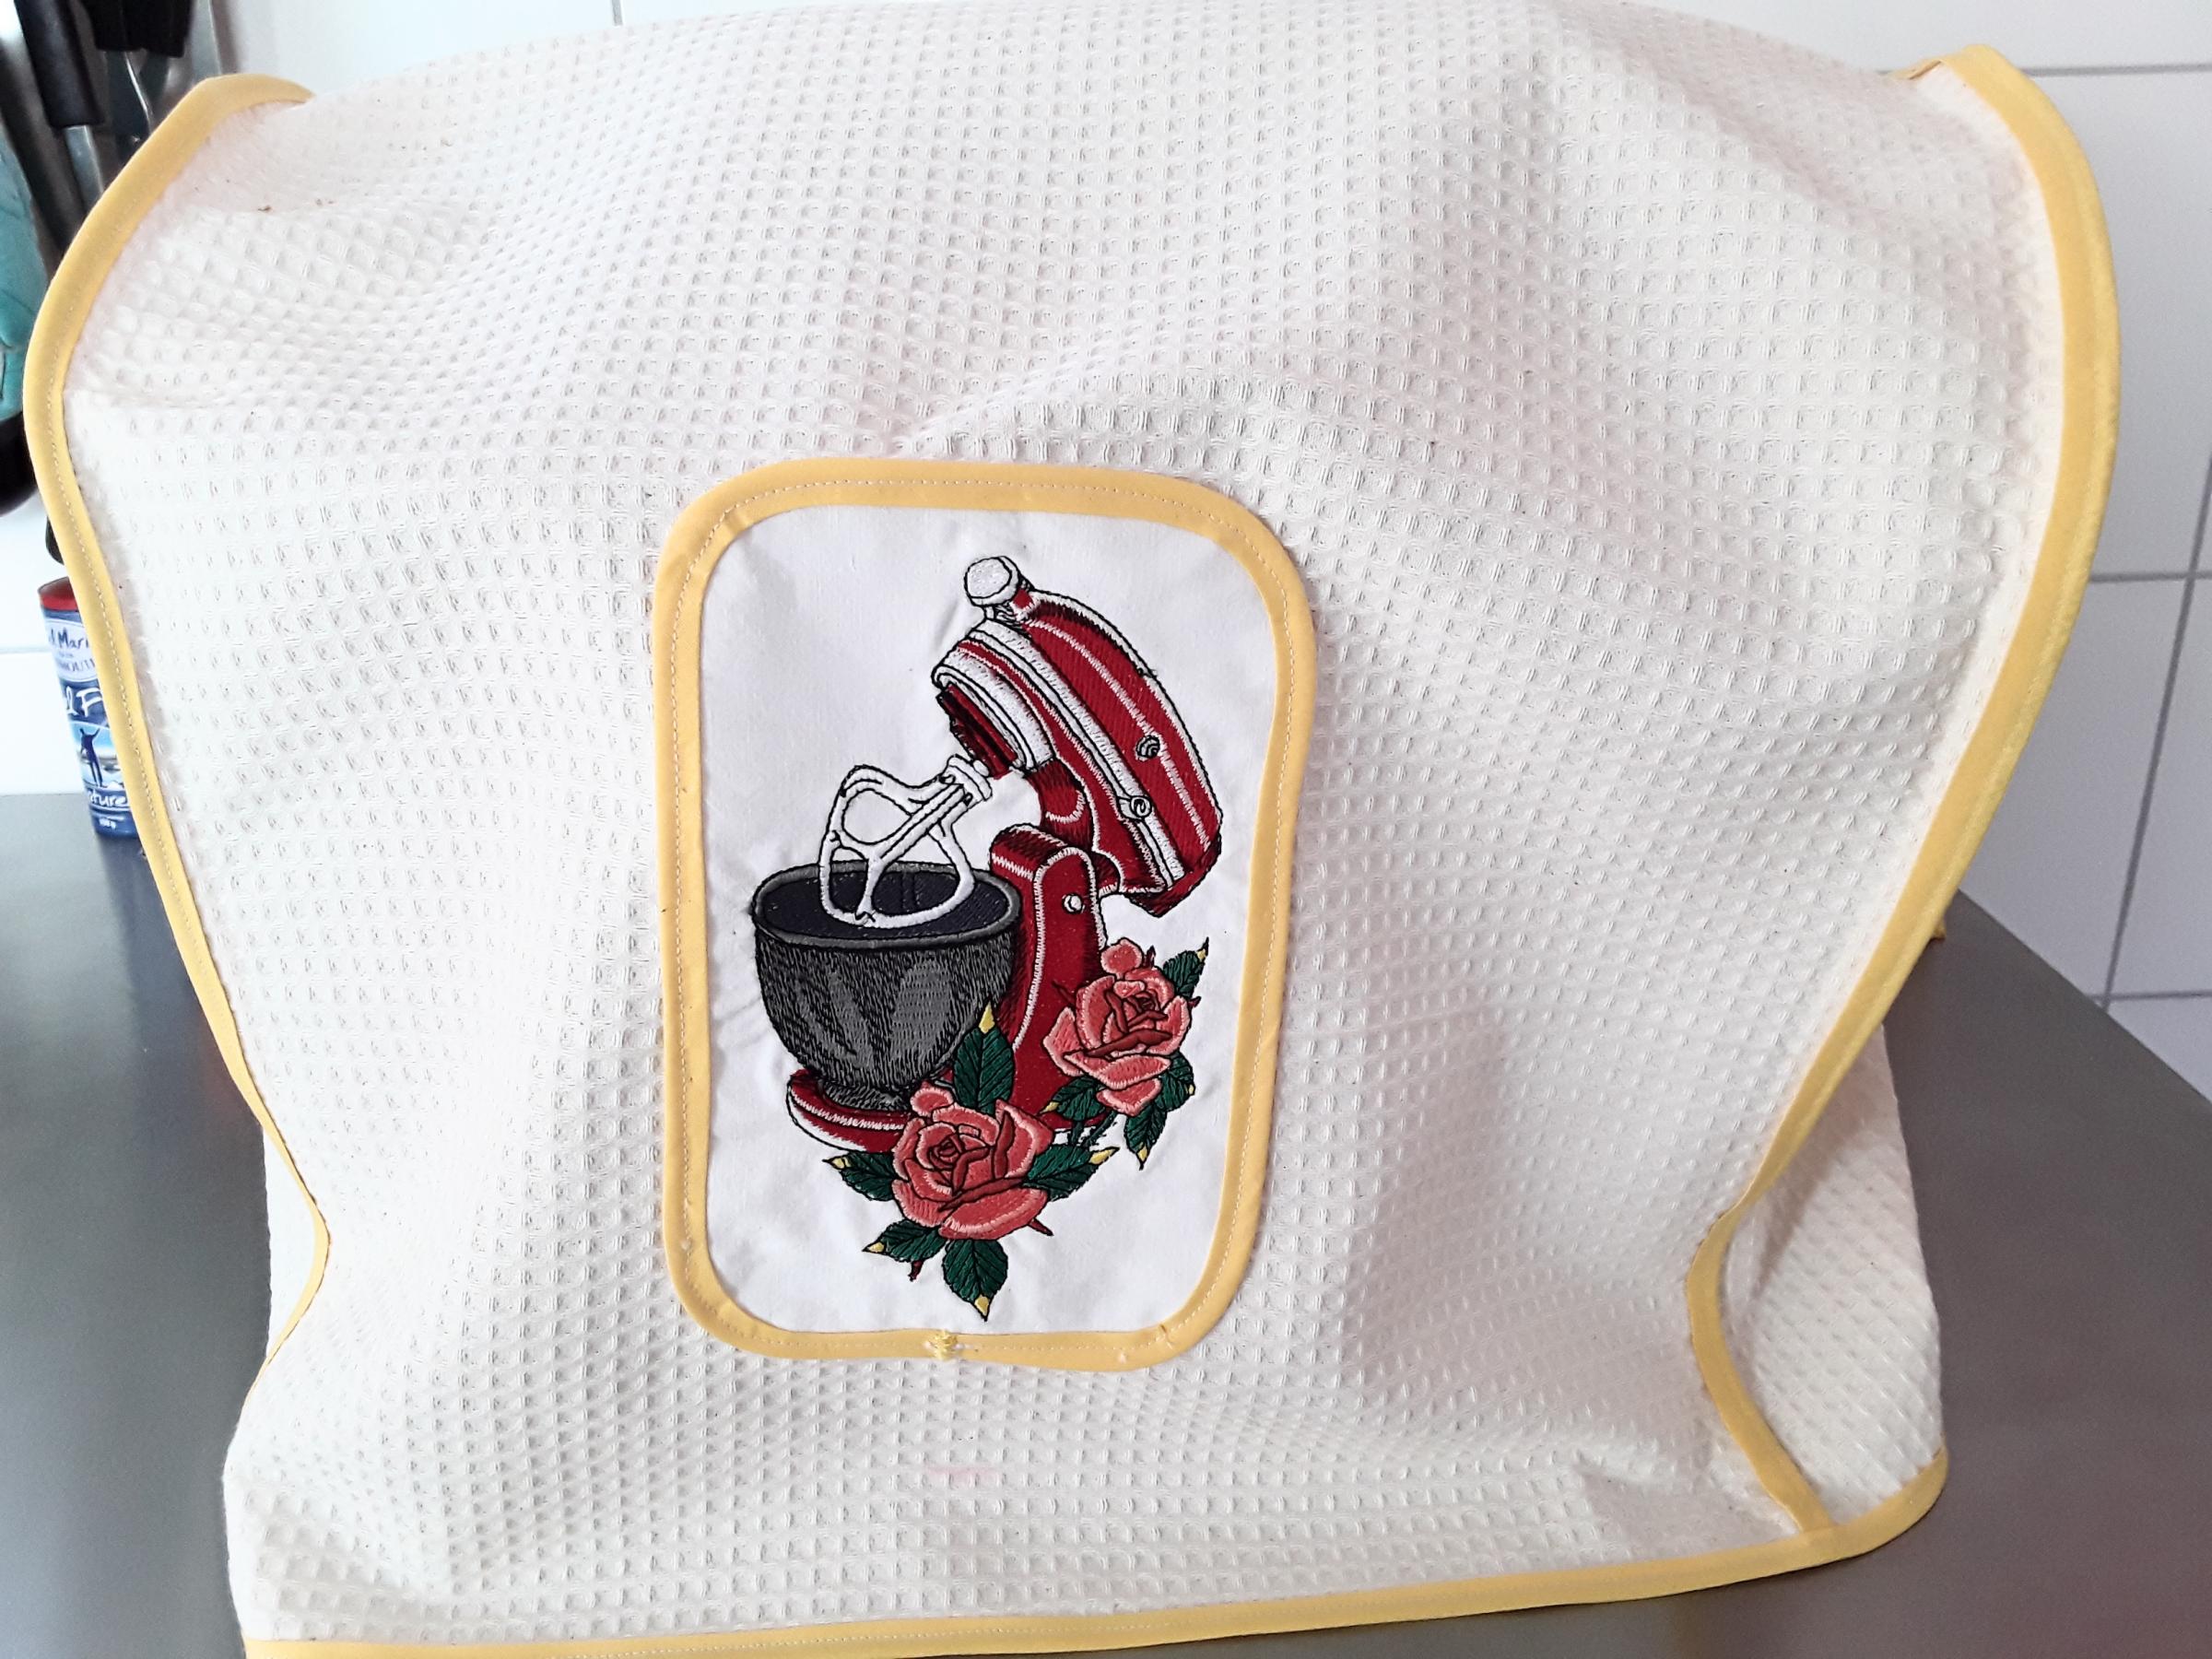 Embroidered case with Kneading machine design